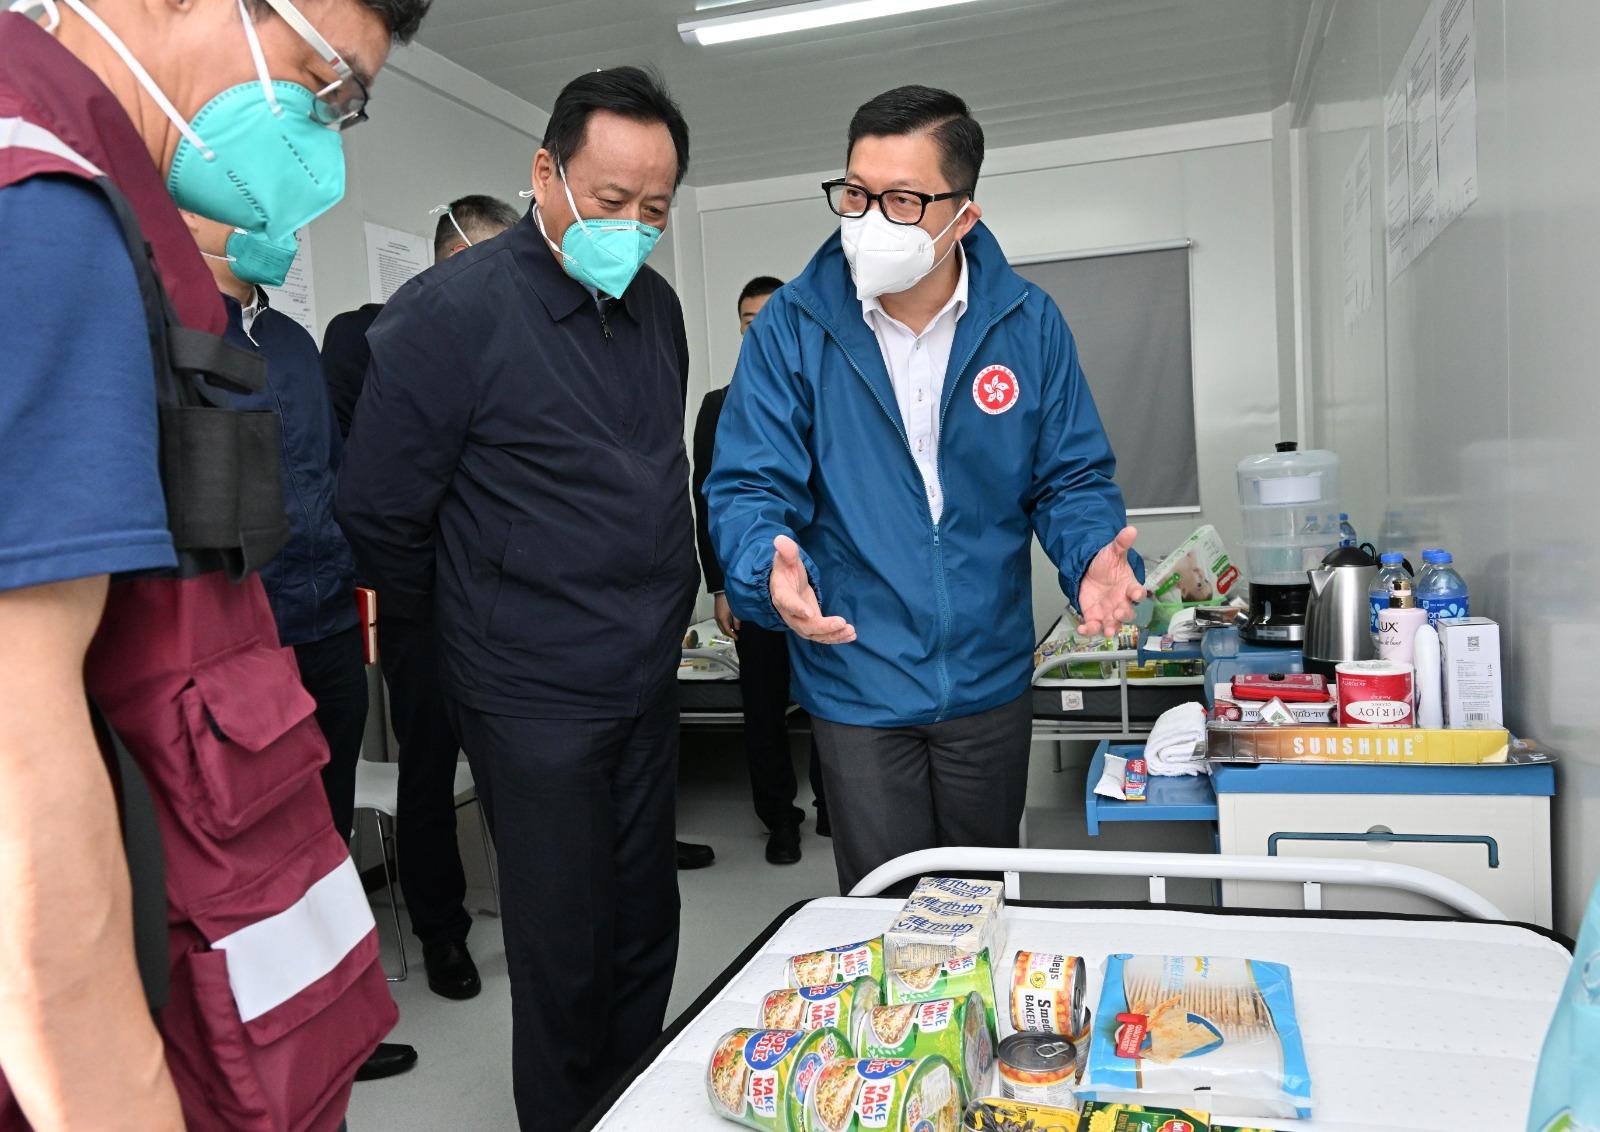 The expert group led by the Leader of the Mainland Chinese medicine expert group of the Central Authorities, Mr Tong Xiaolin, today (March 30) visited the community isolation facility in Hung Shui Kiu, Yuen Long. Photo shows the Secretary for Security, Mr Tang Ping-keung (first right) introducing the supplies in the community isolation facility to Mr Tong (second left) and the expert group.